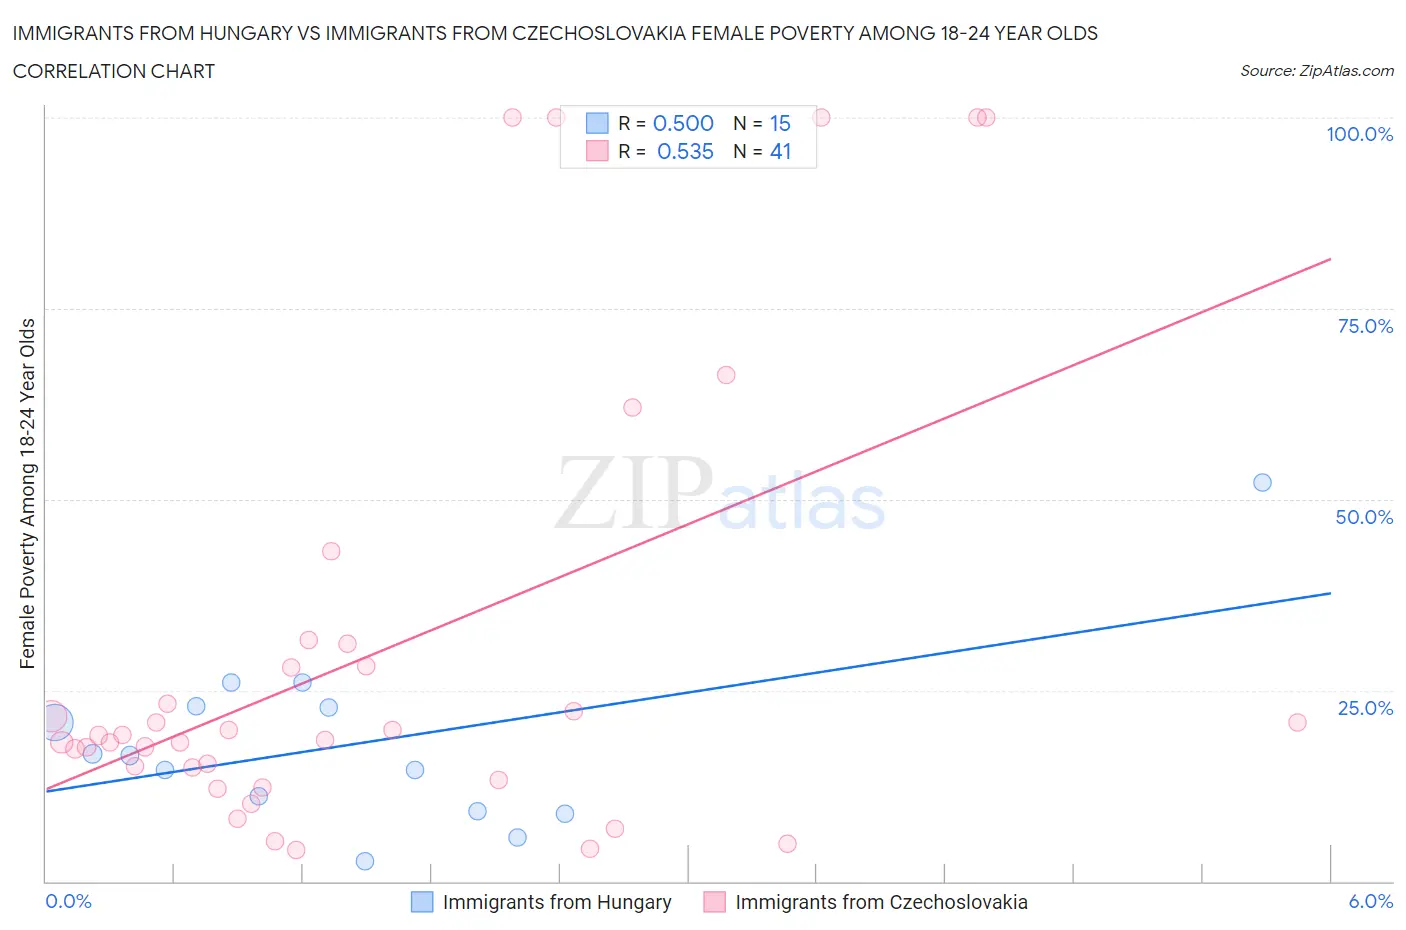 Immigrants from Hungary vs Immigrants from Czechoslovakia Female Poverty Among 18-24 Year Olds